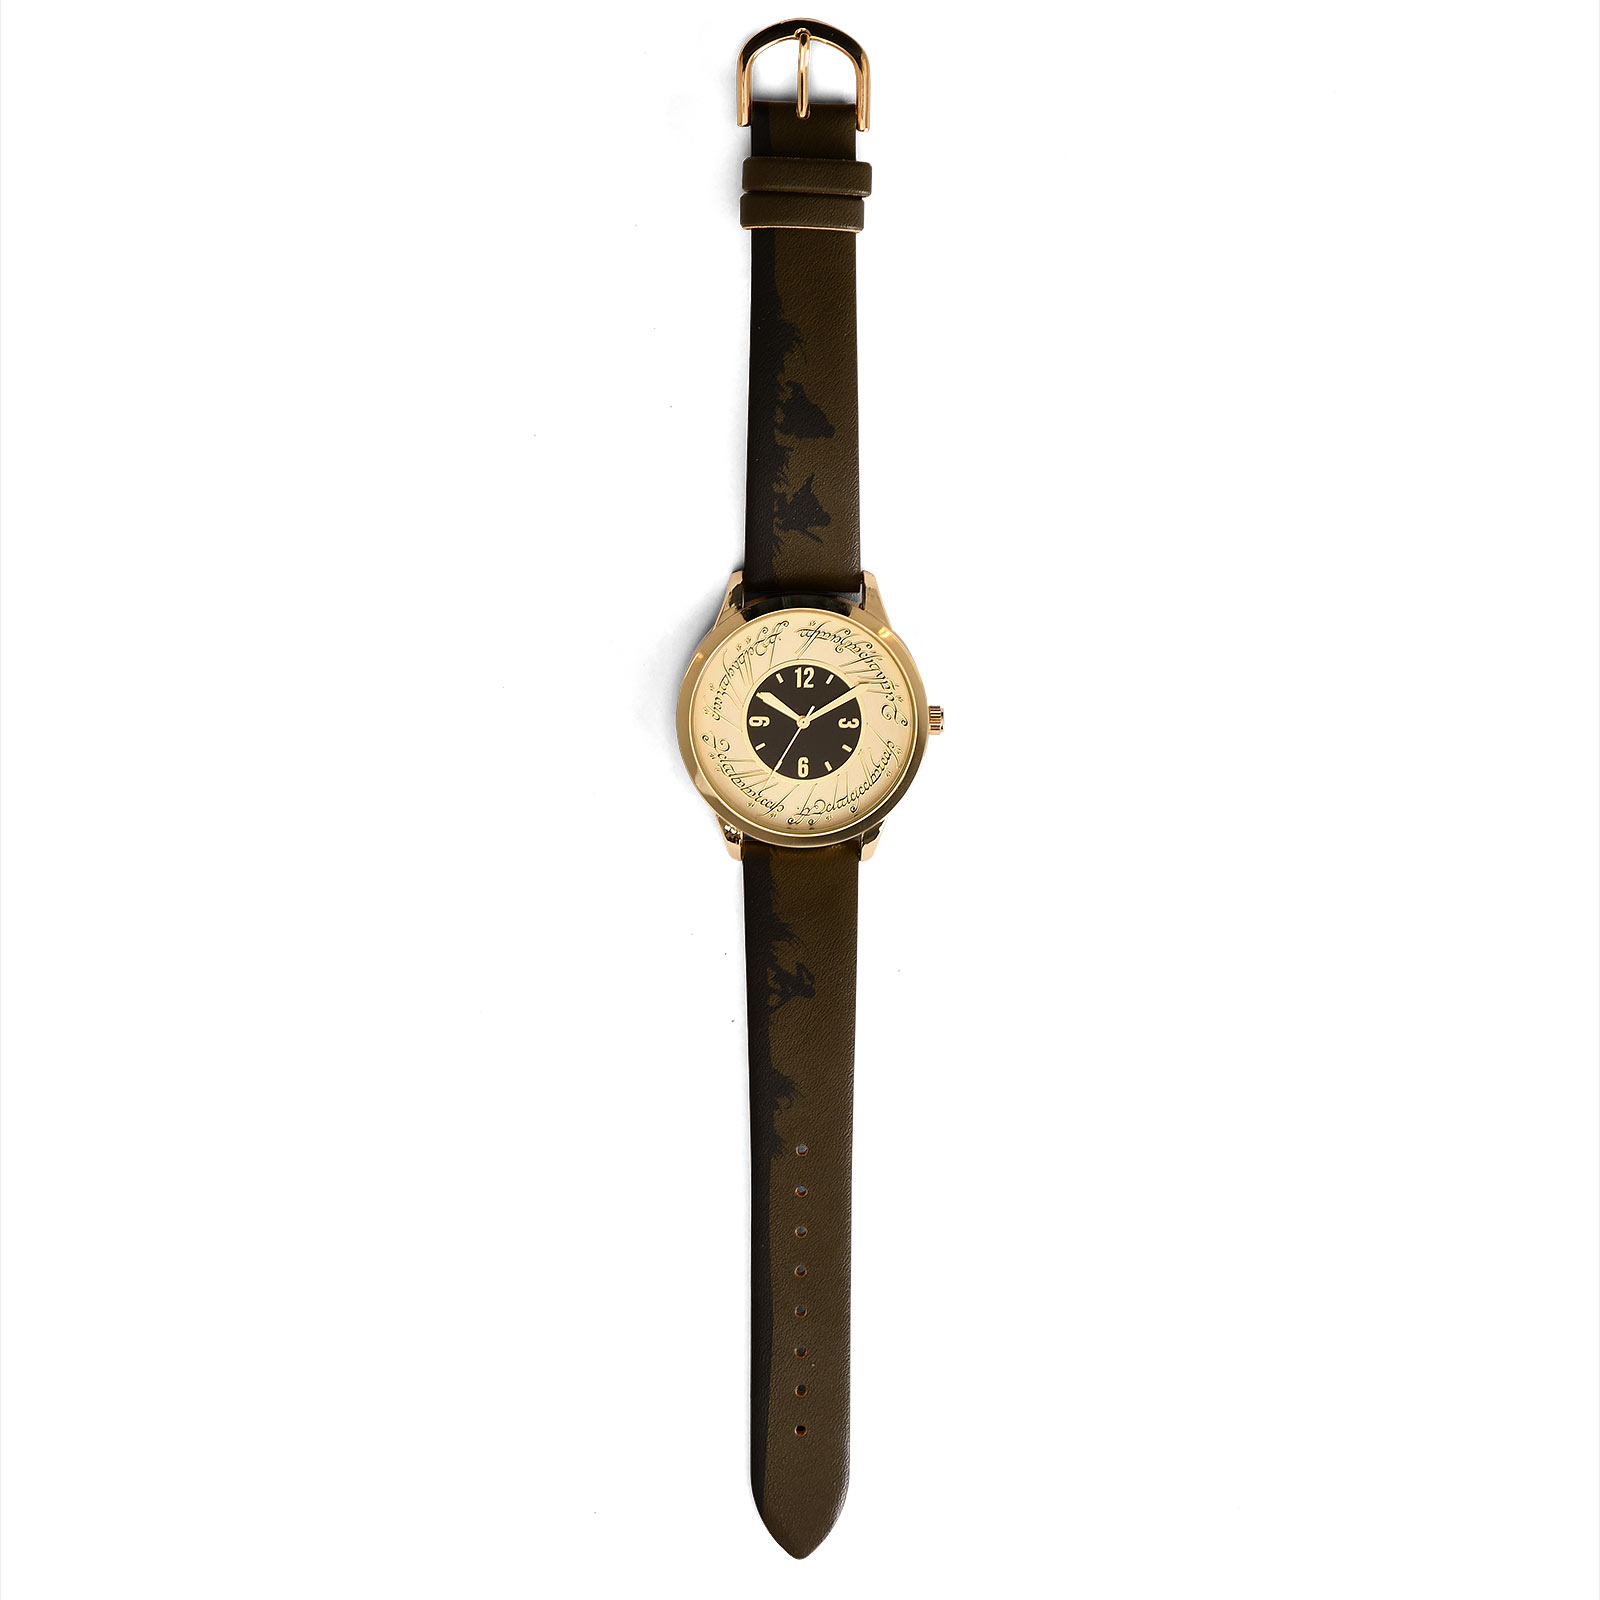 Lord of the Rings - The One Ring Wristwatch